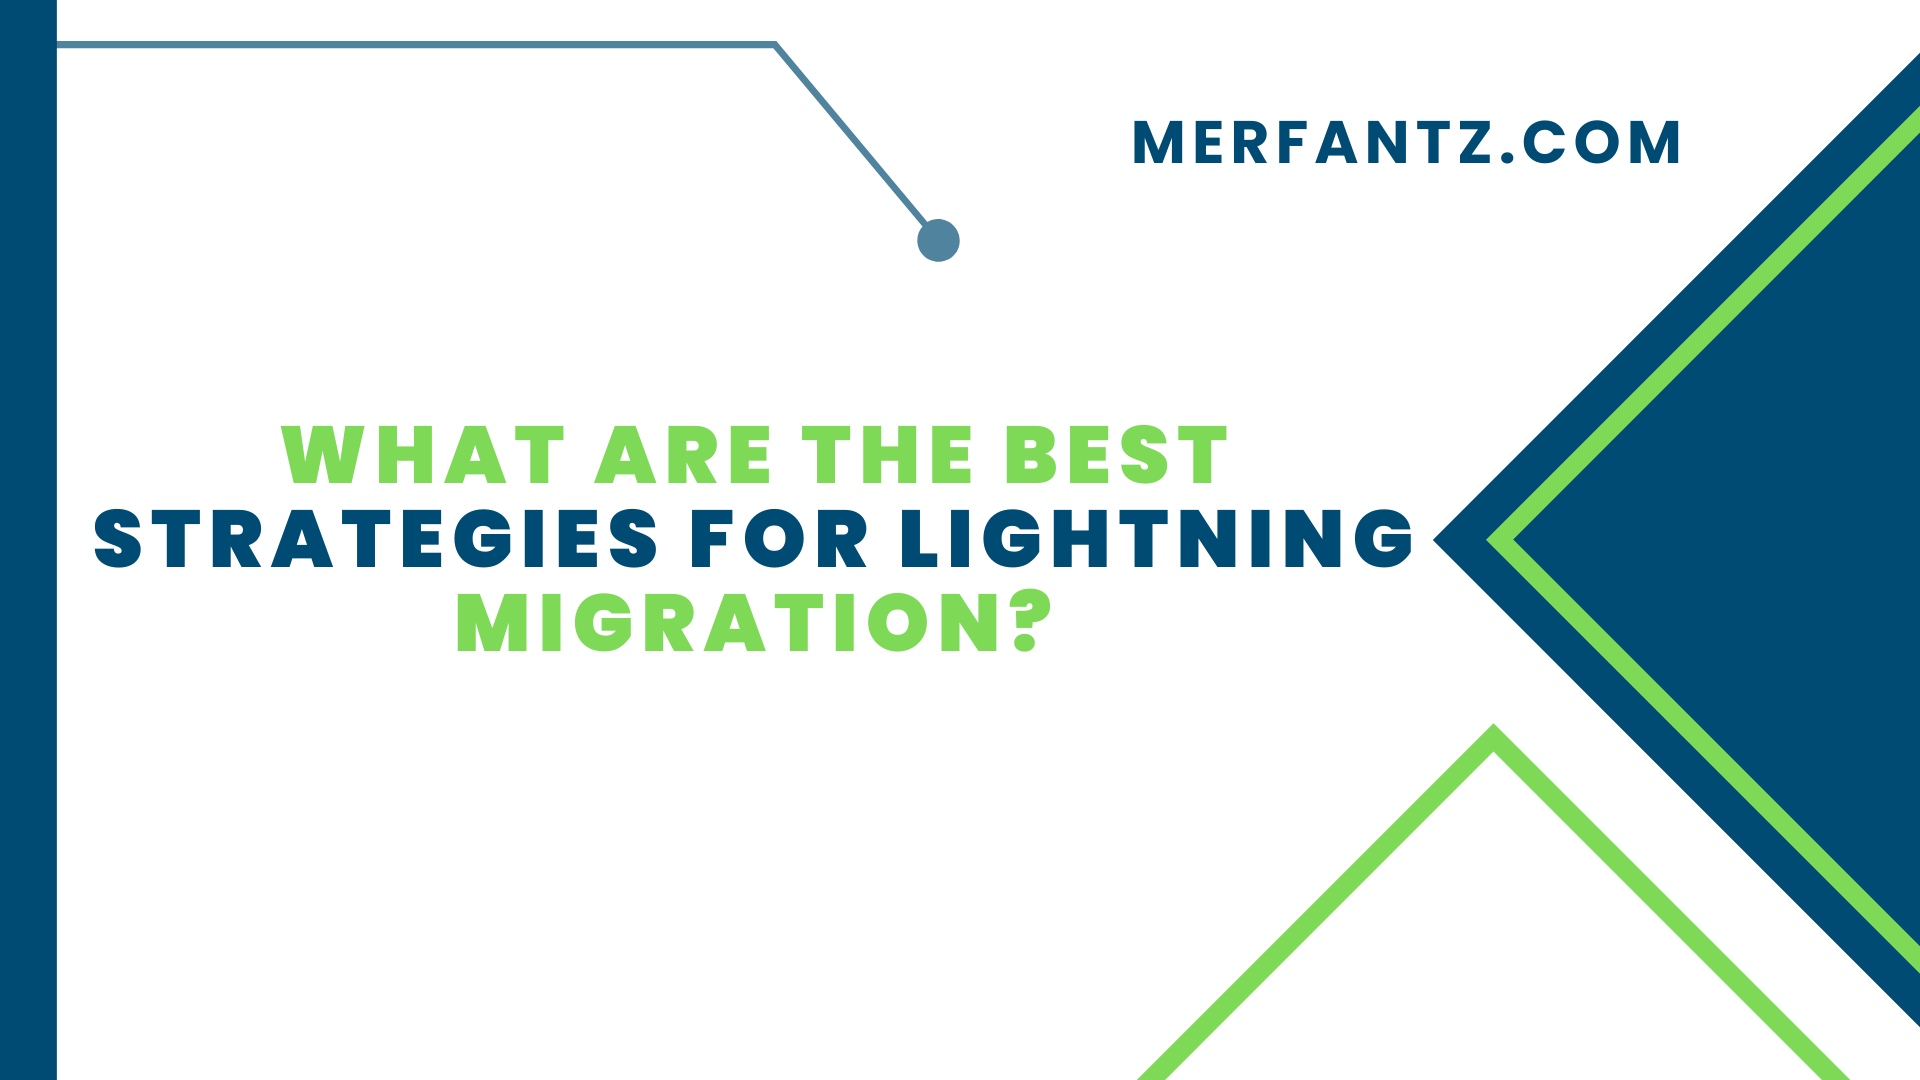 What Are the Best Strategies for Lightning Migration